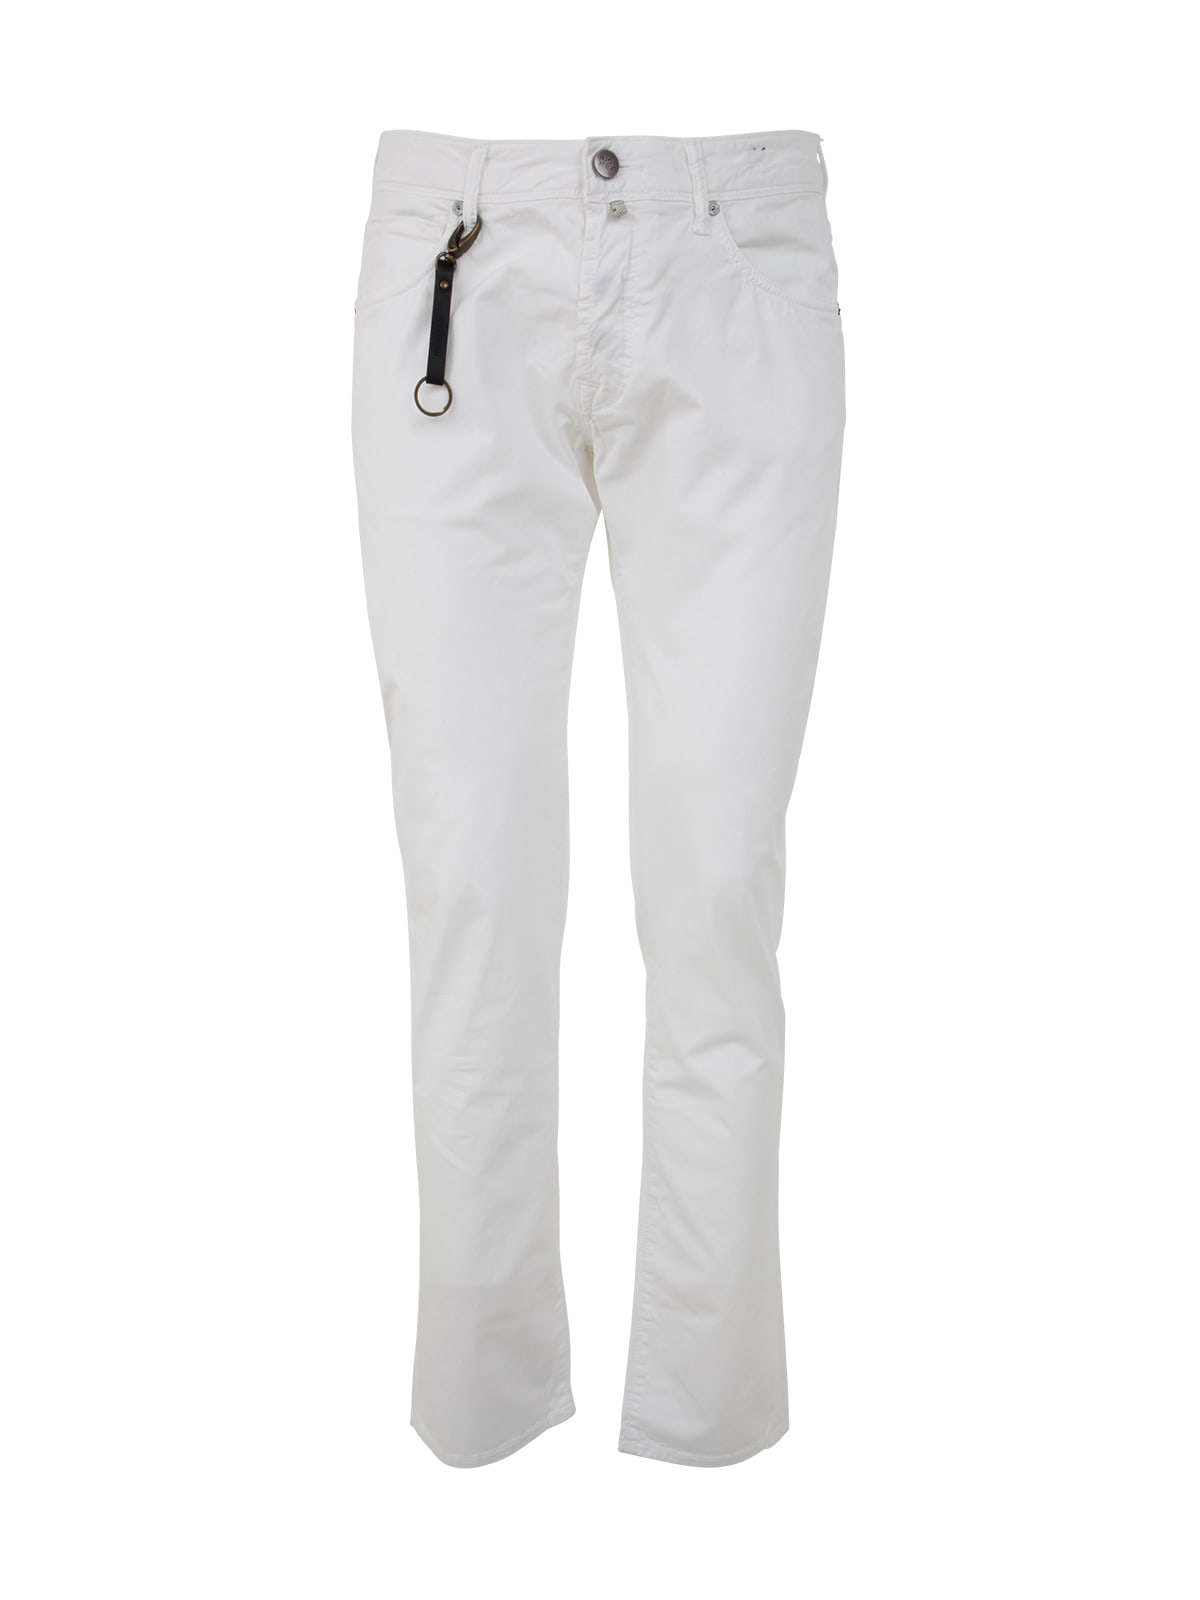 Incotex Genjc Five Pocket Solid Jeans In Optical White